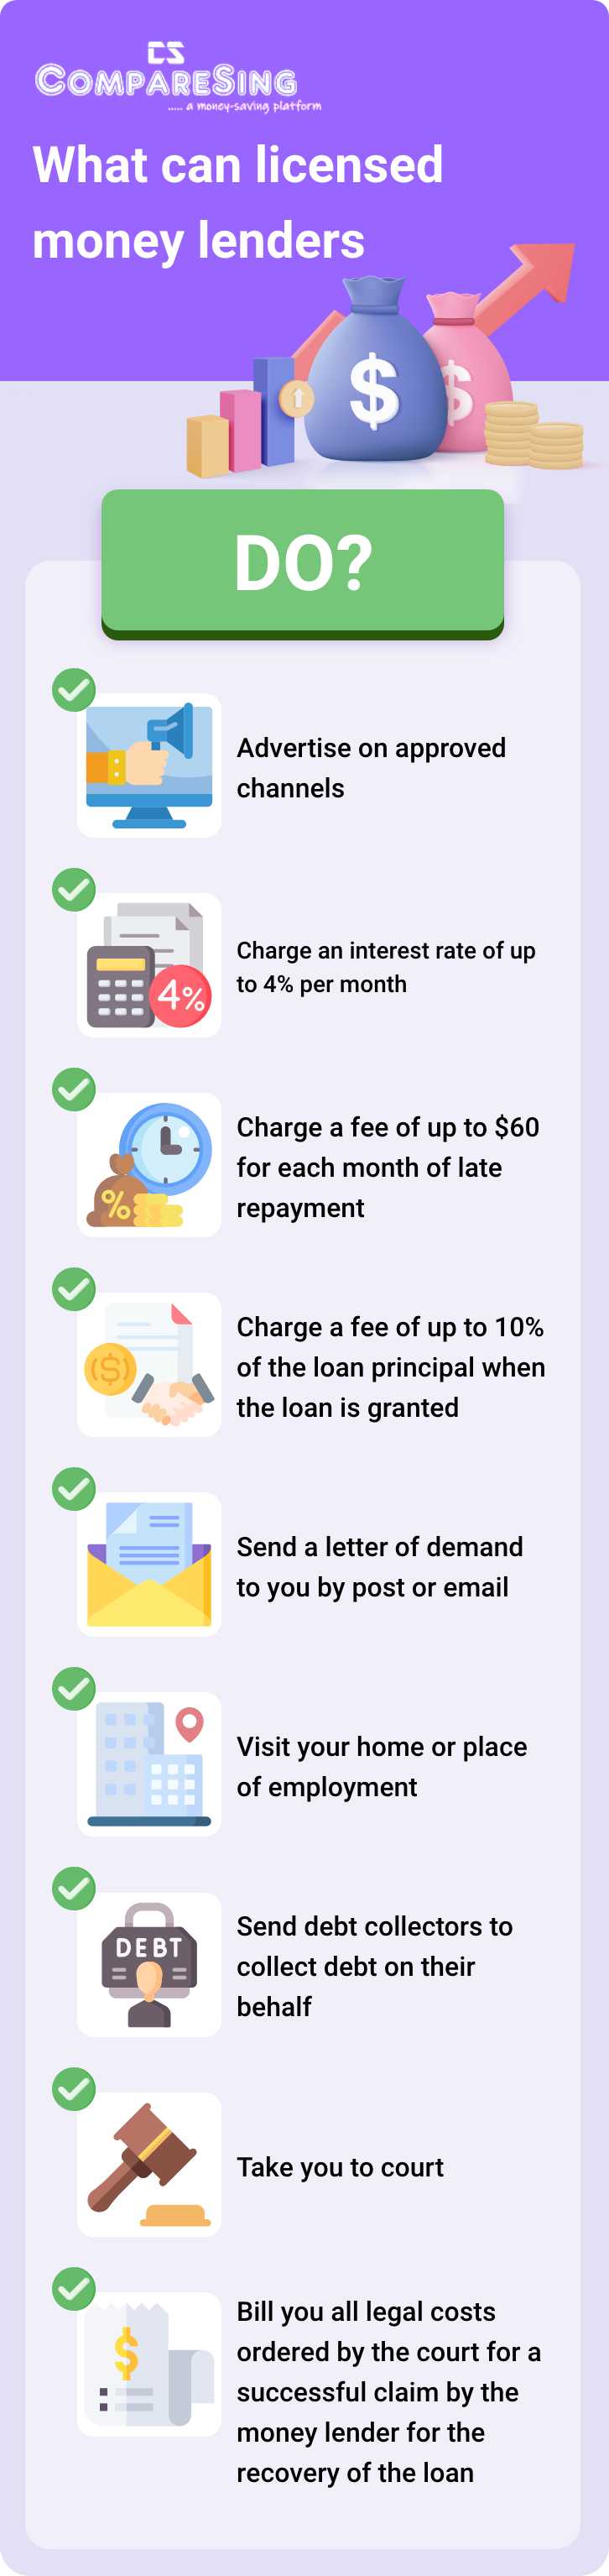 Infographic detailing things that licensed money lenders in Singapore can do